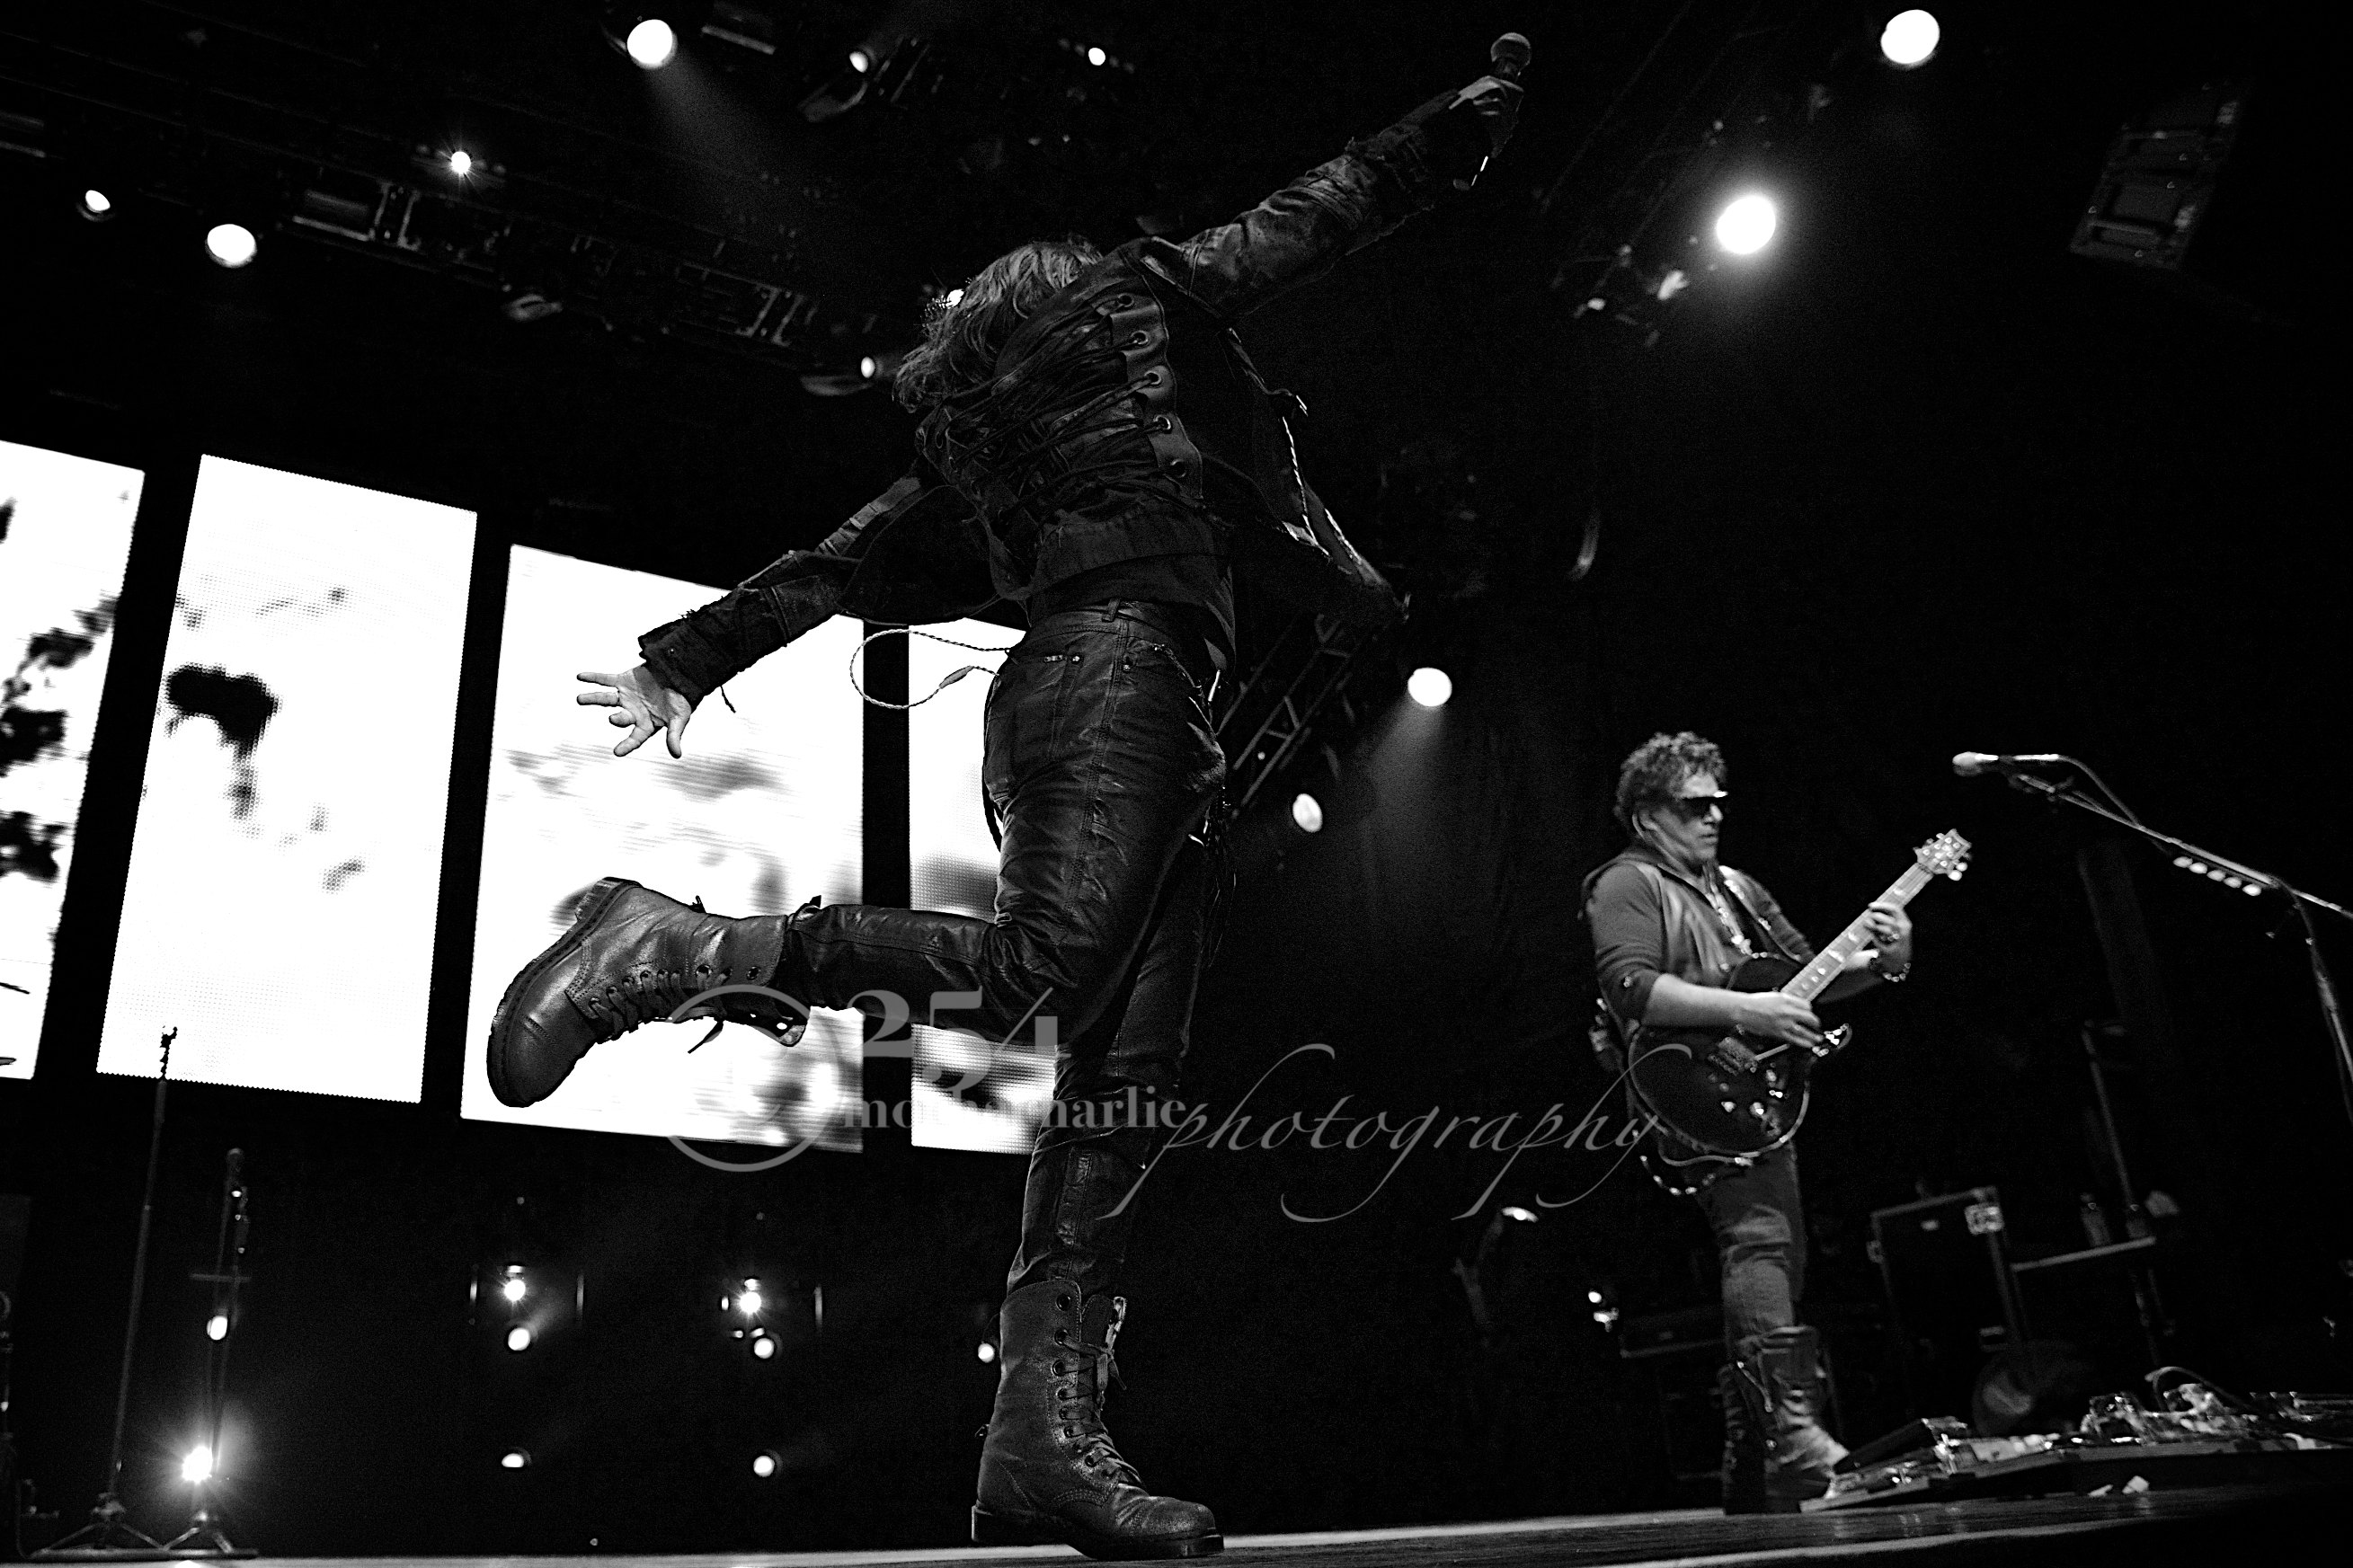 Journey at White River Ampitheater (Photo by Mocha Charlie)